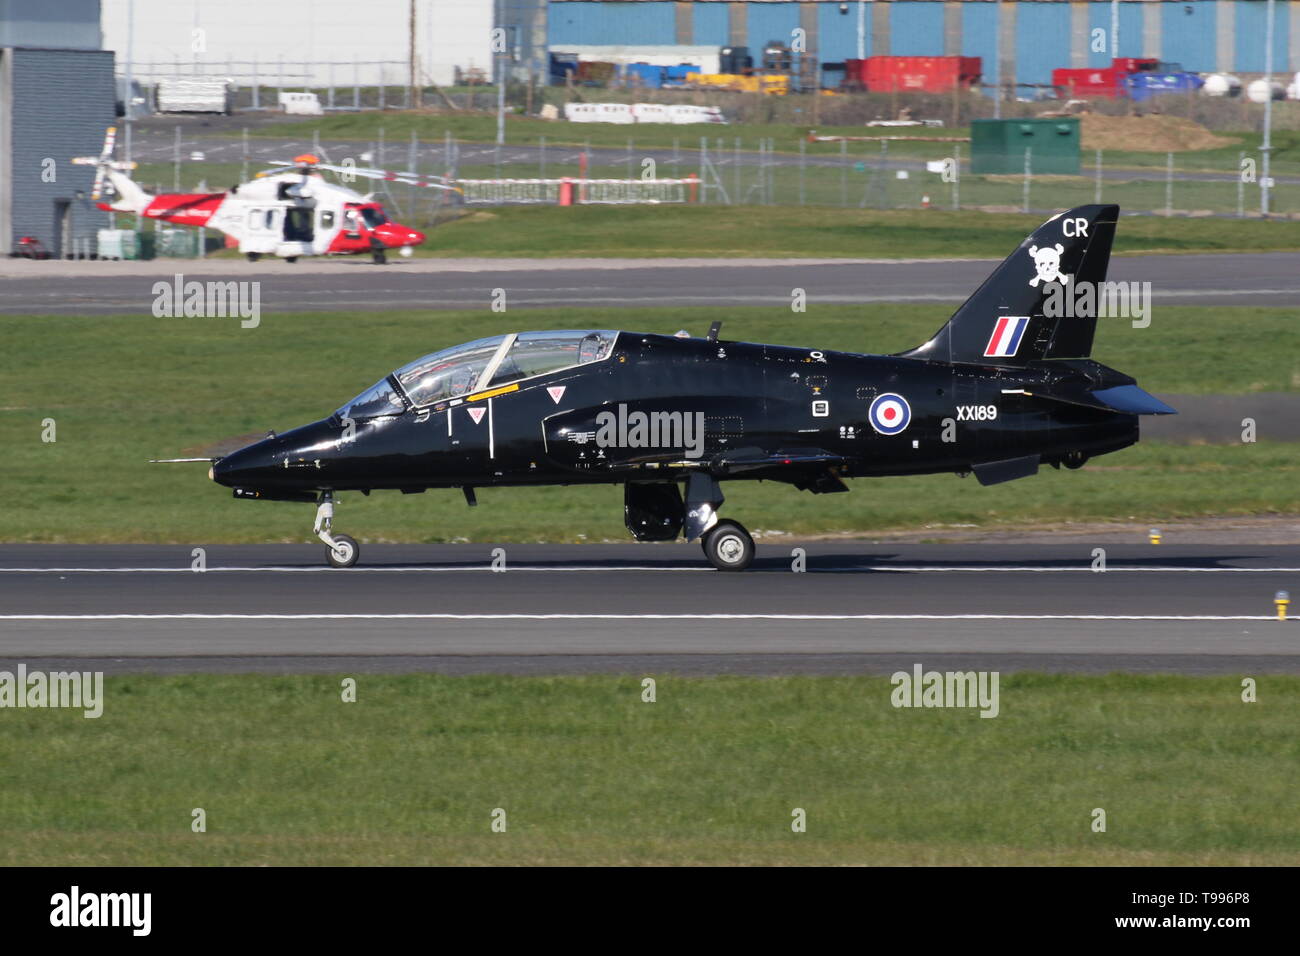 XX189, a BAe Hawk T1 operated by 100 Squadron, Royal Air Force, arriving back at Prestwick Airport after a sortie during Exercise Joint Warrior 19-1. Stock Photo